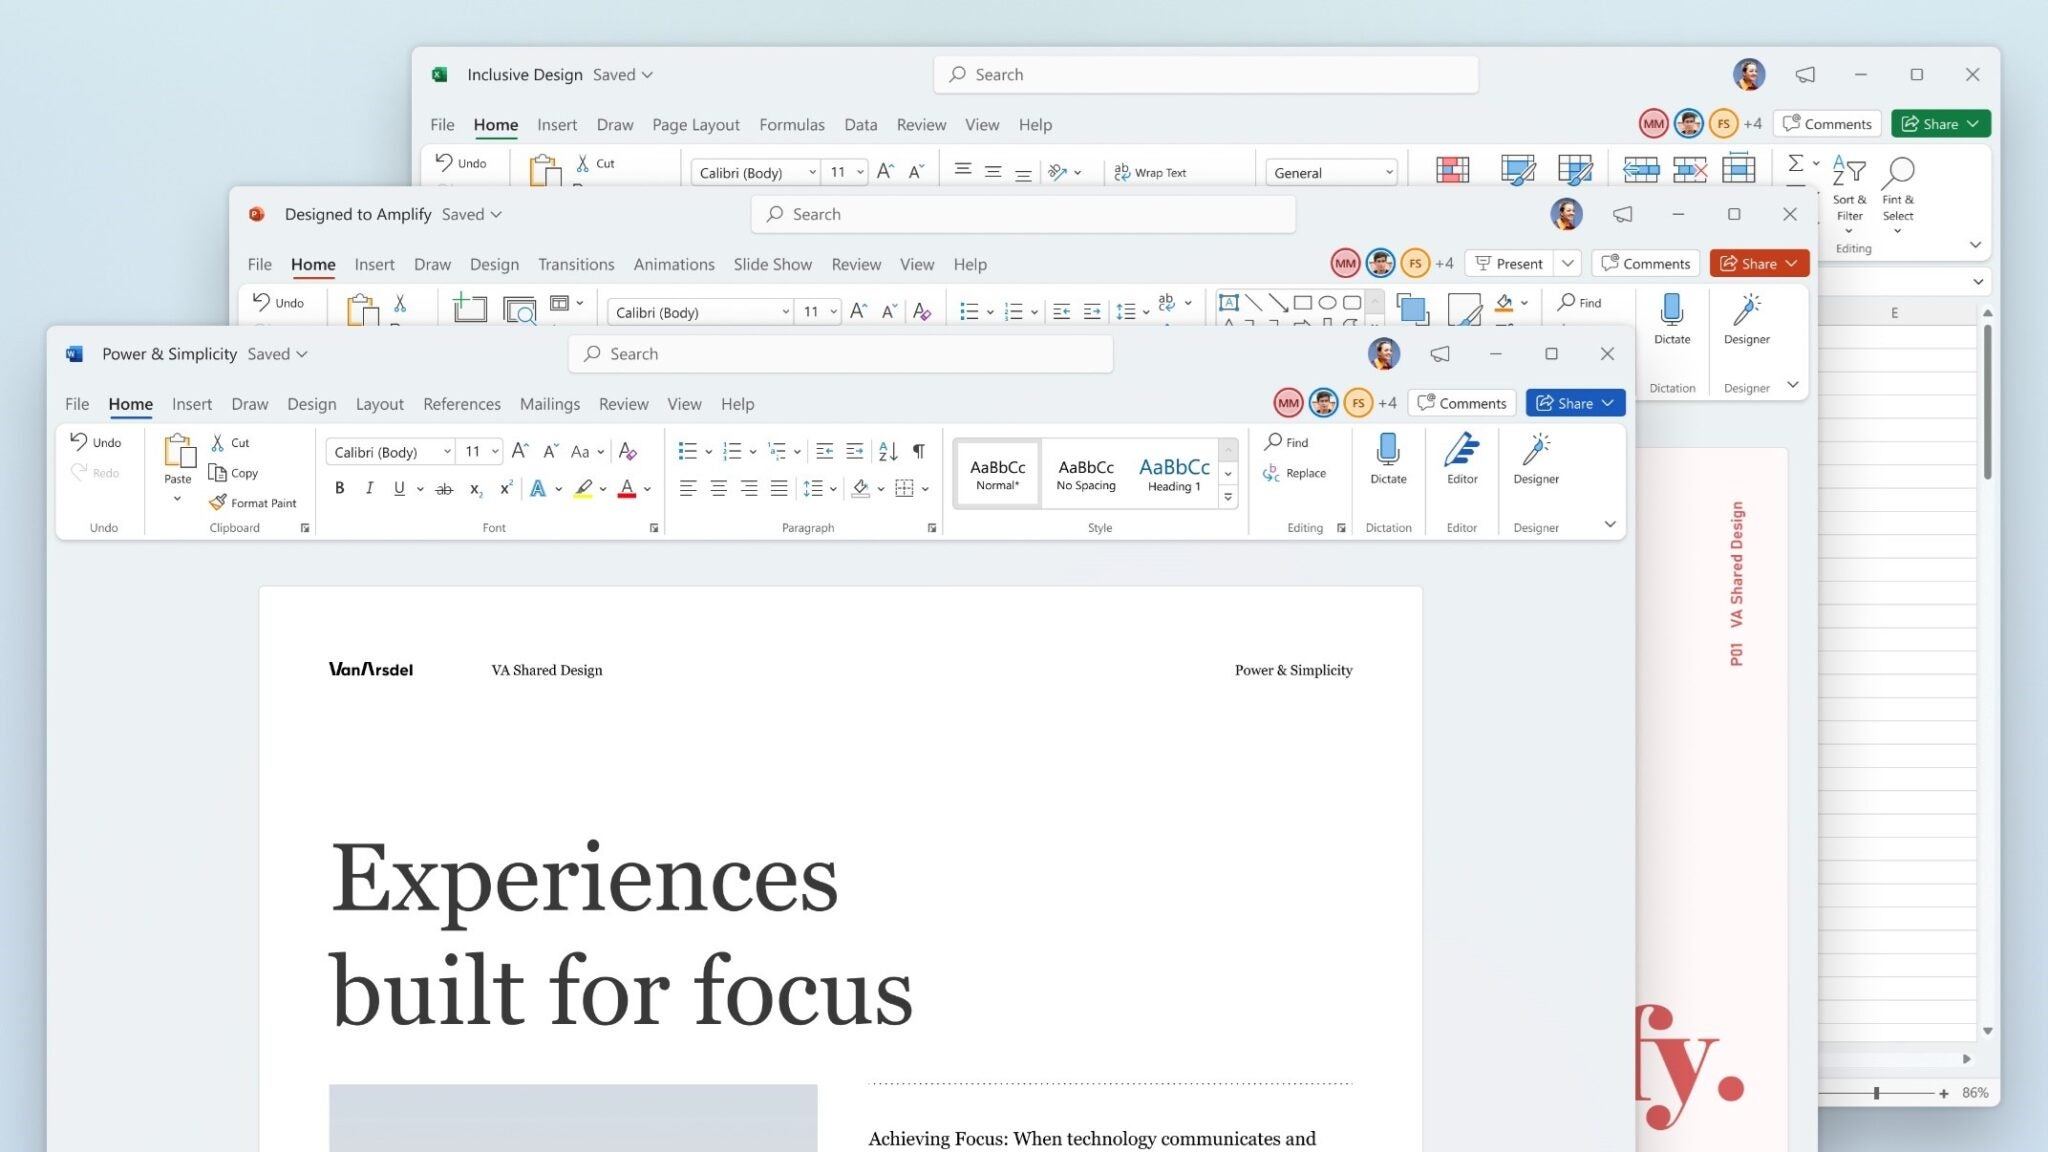 Microsoft Office 2021 lands on Windows 11 day – here's all the new features | Trusted Reviews